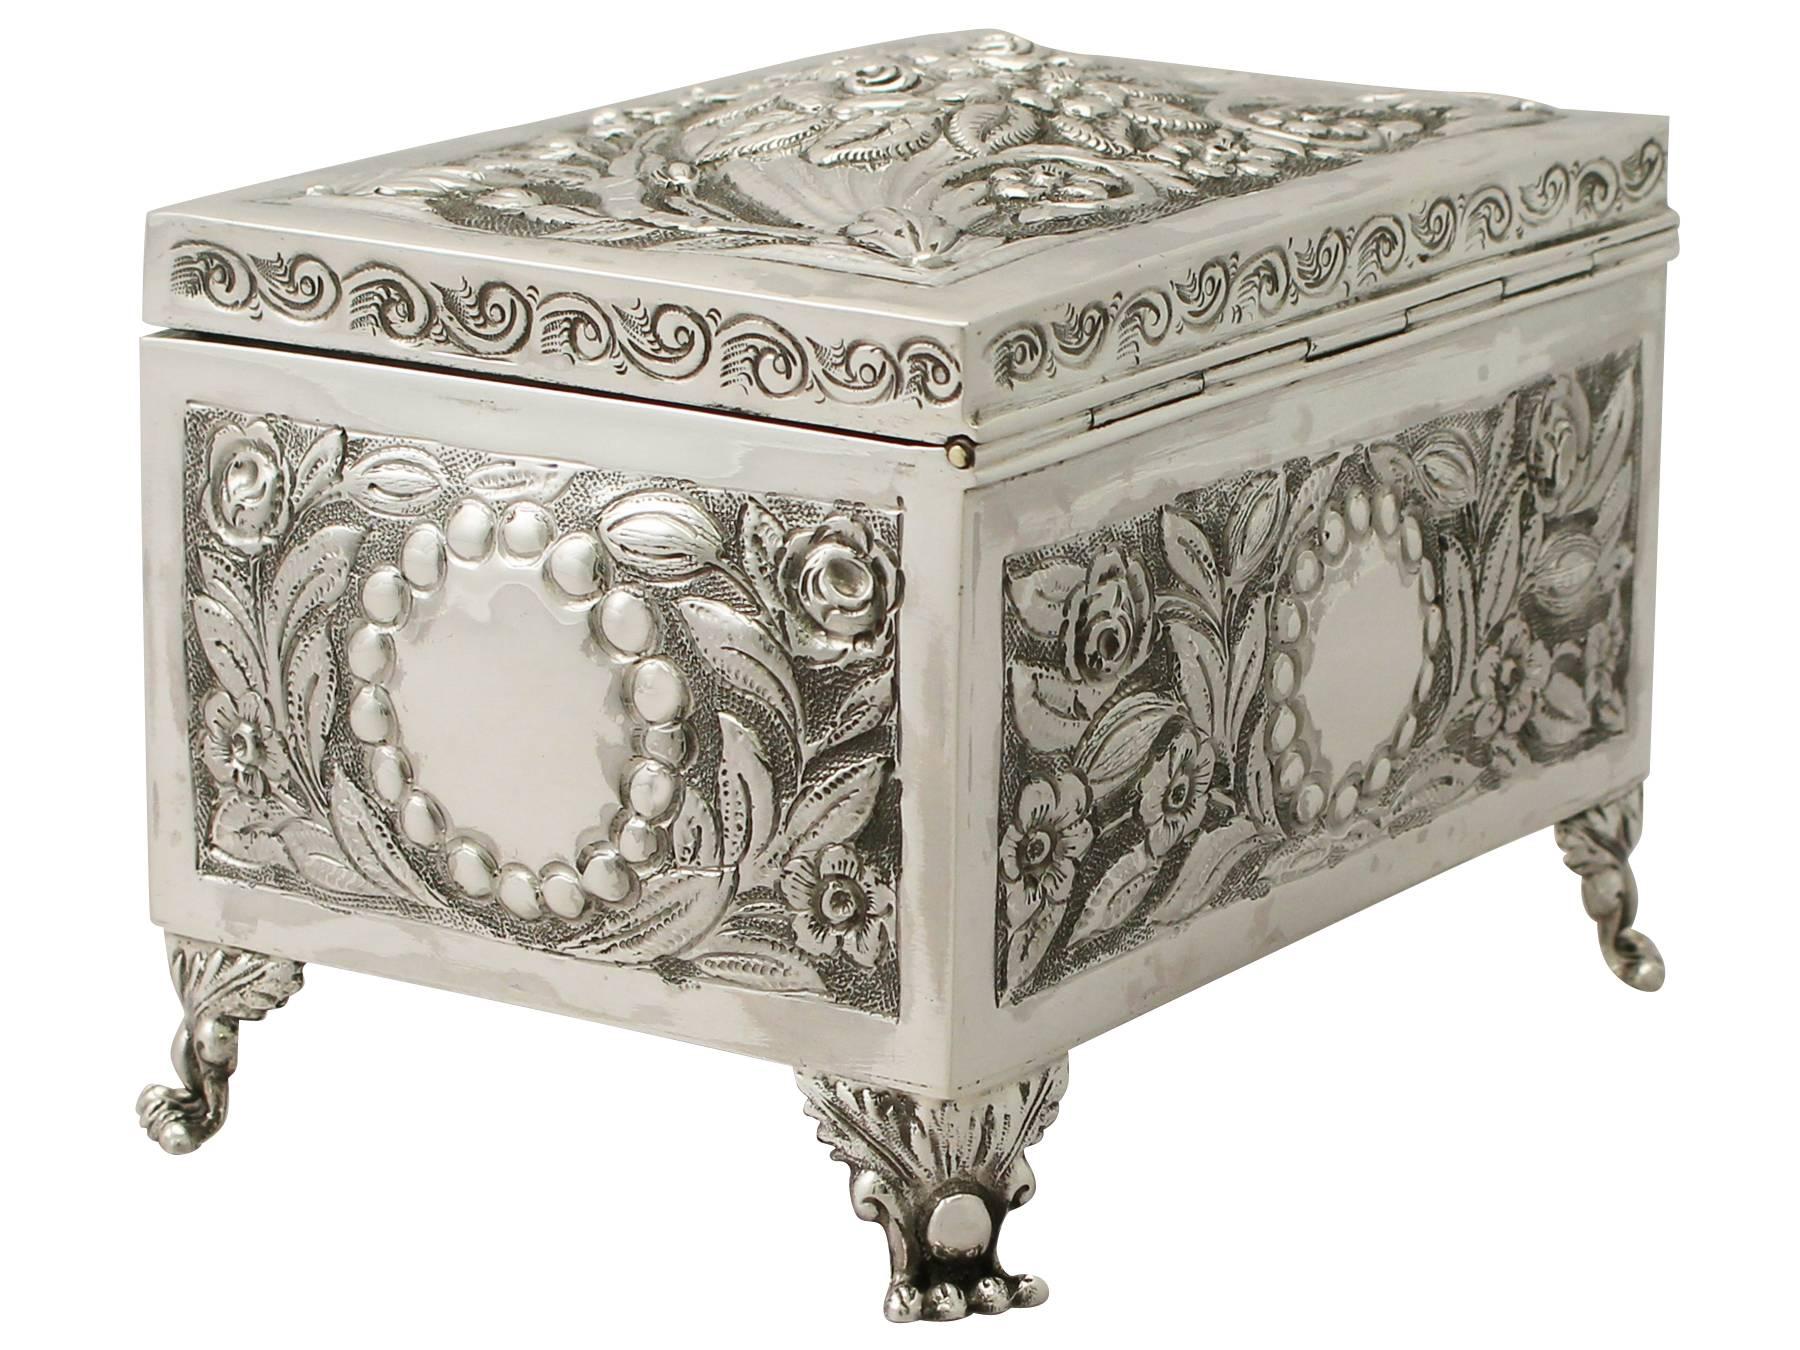 An exceptional, fine and impressive antique Edwardian English sterling silver box/jewelry casket; an addition to the ornamental silverware collection.

This exceptional antique Edwardian sterling silver box has a rectangular form onto four Regency